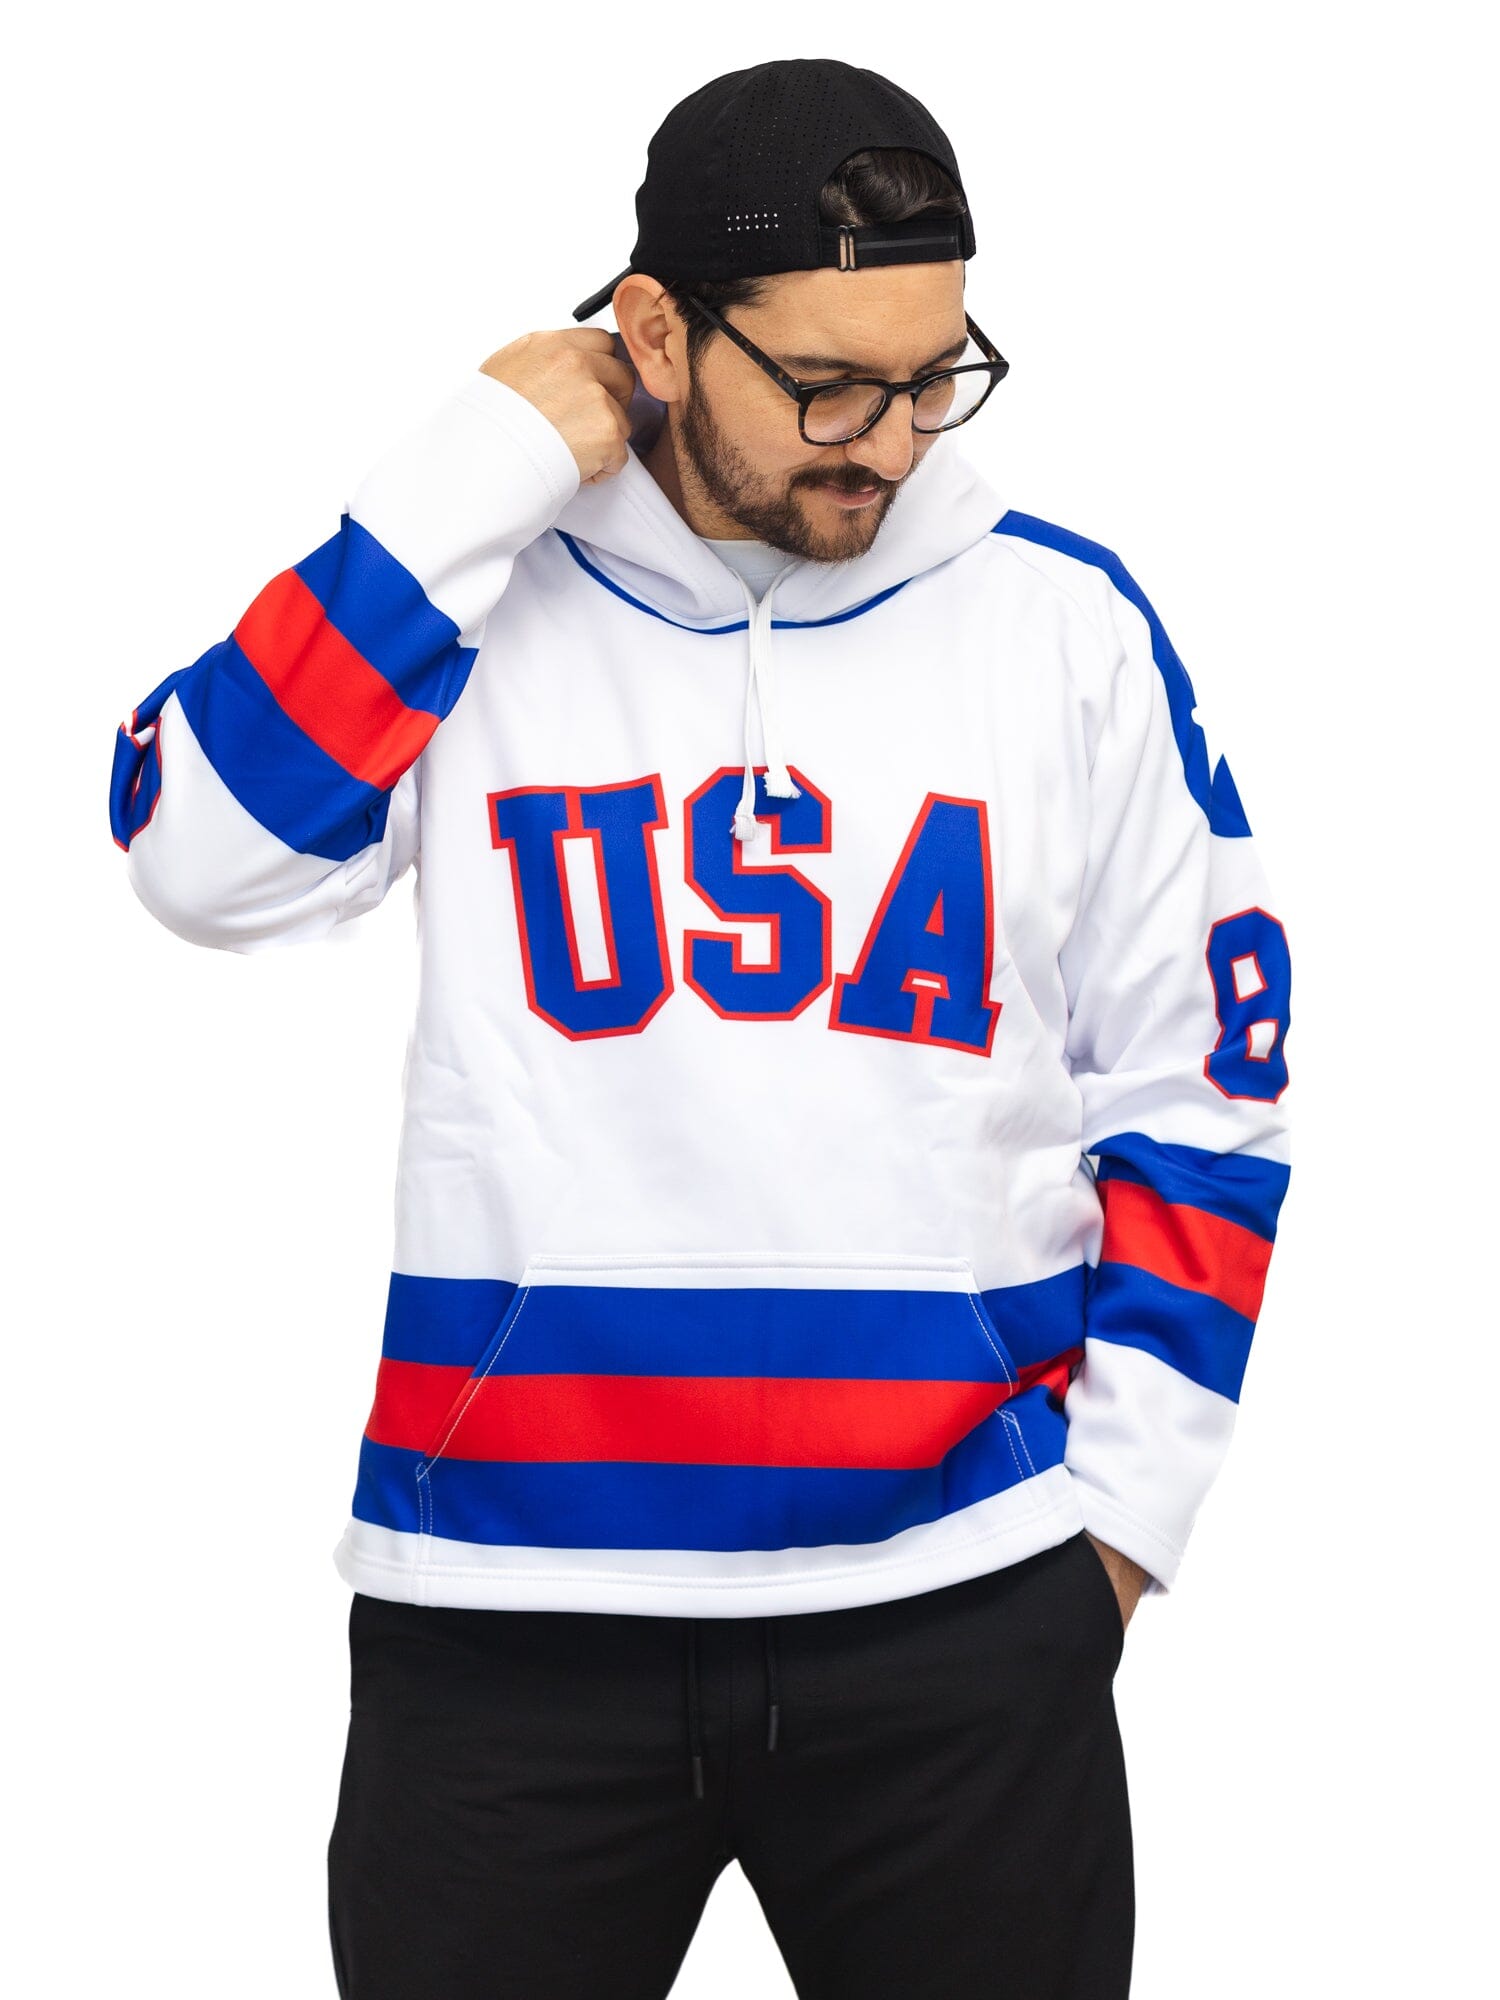 USA Miracle on Ice 1980 Away Hockey Hoodie - FRONT 2